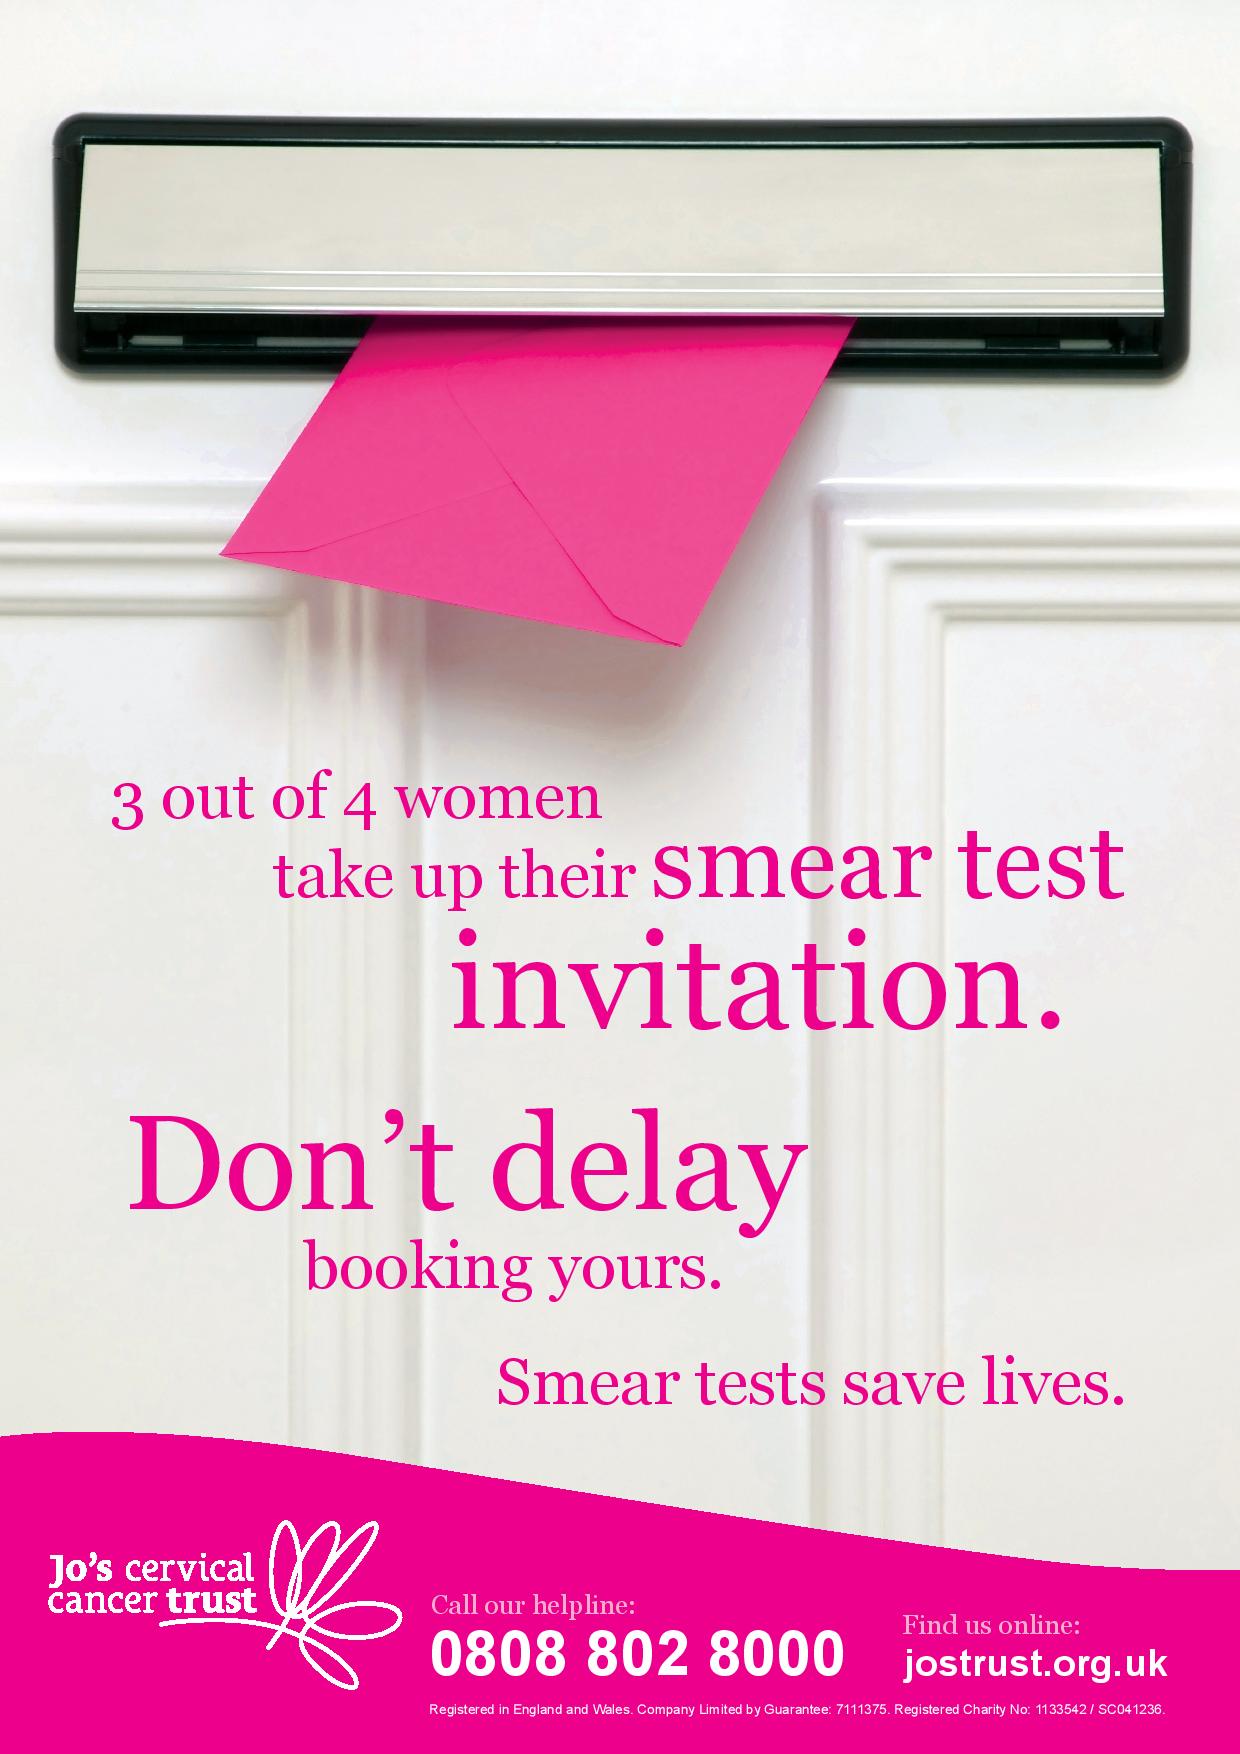 3 out of 4 women take up their smear test invitation. Don't delay booking yours. Smear tests save lives.